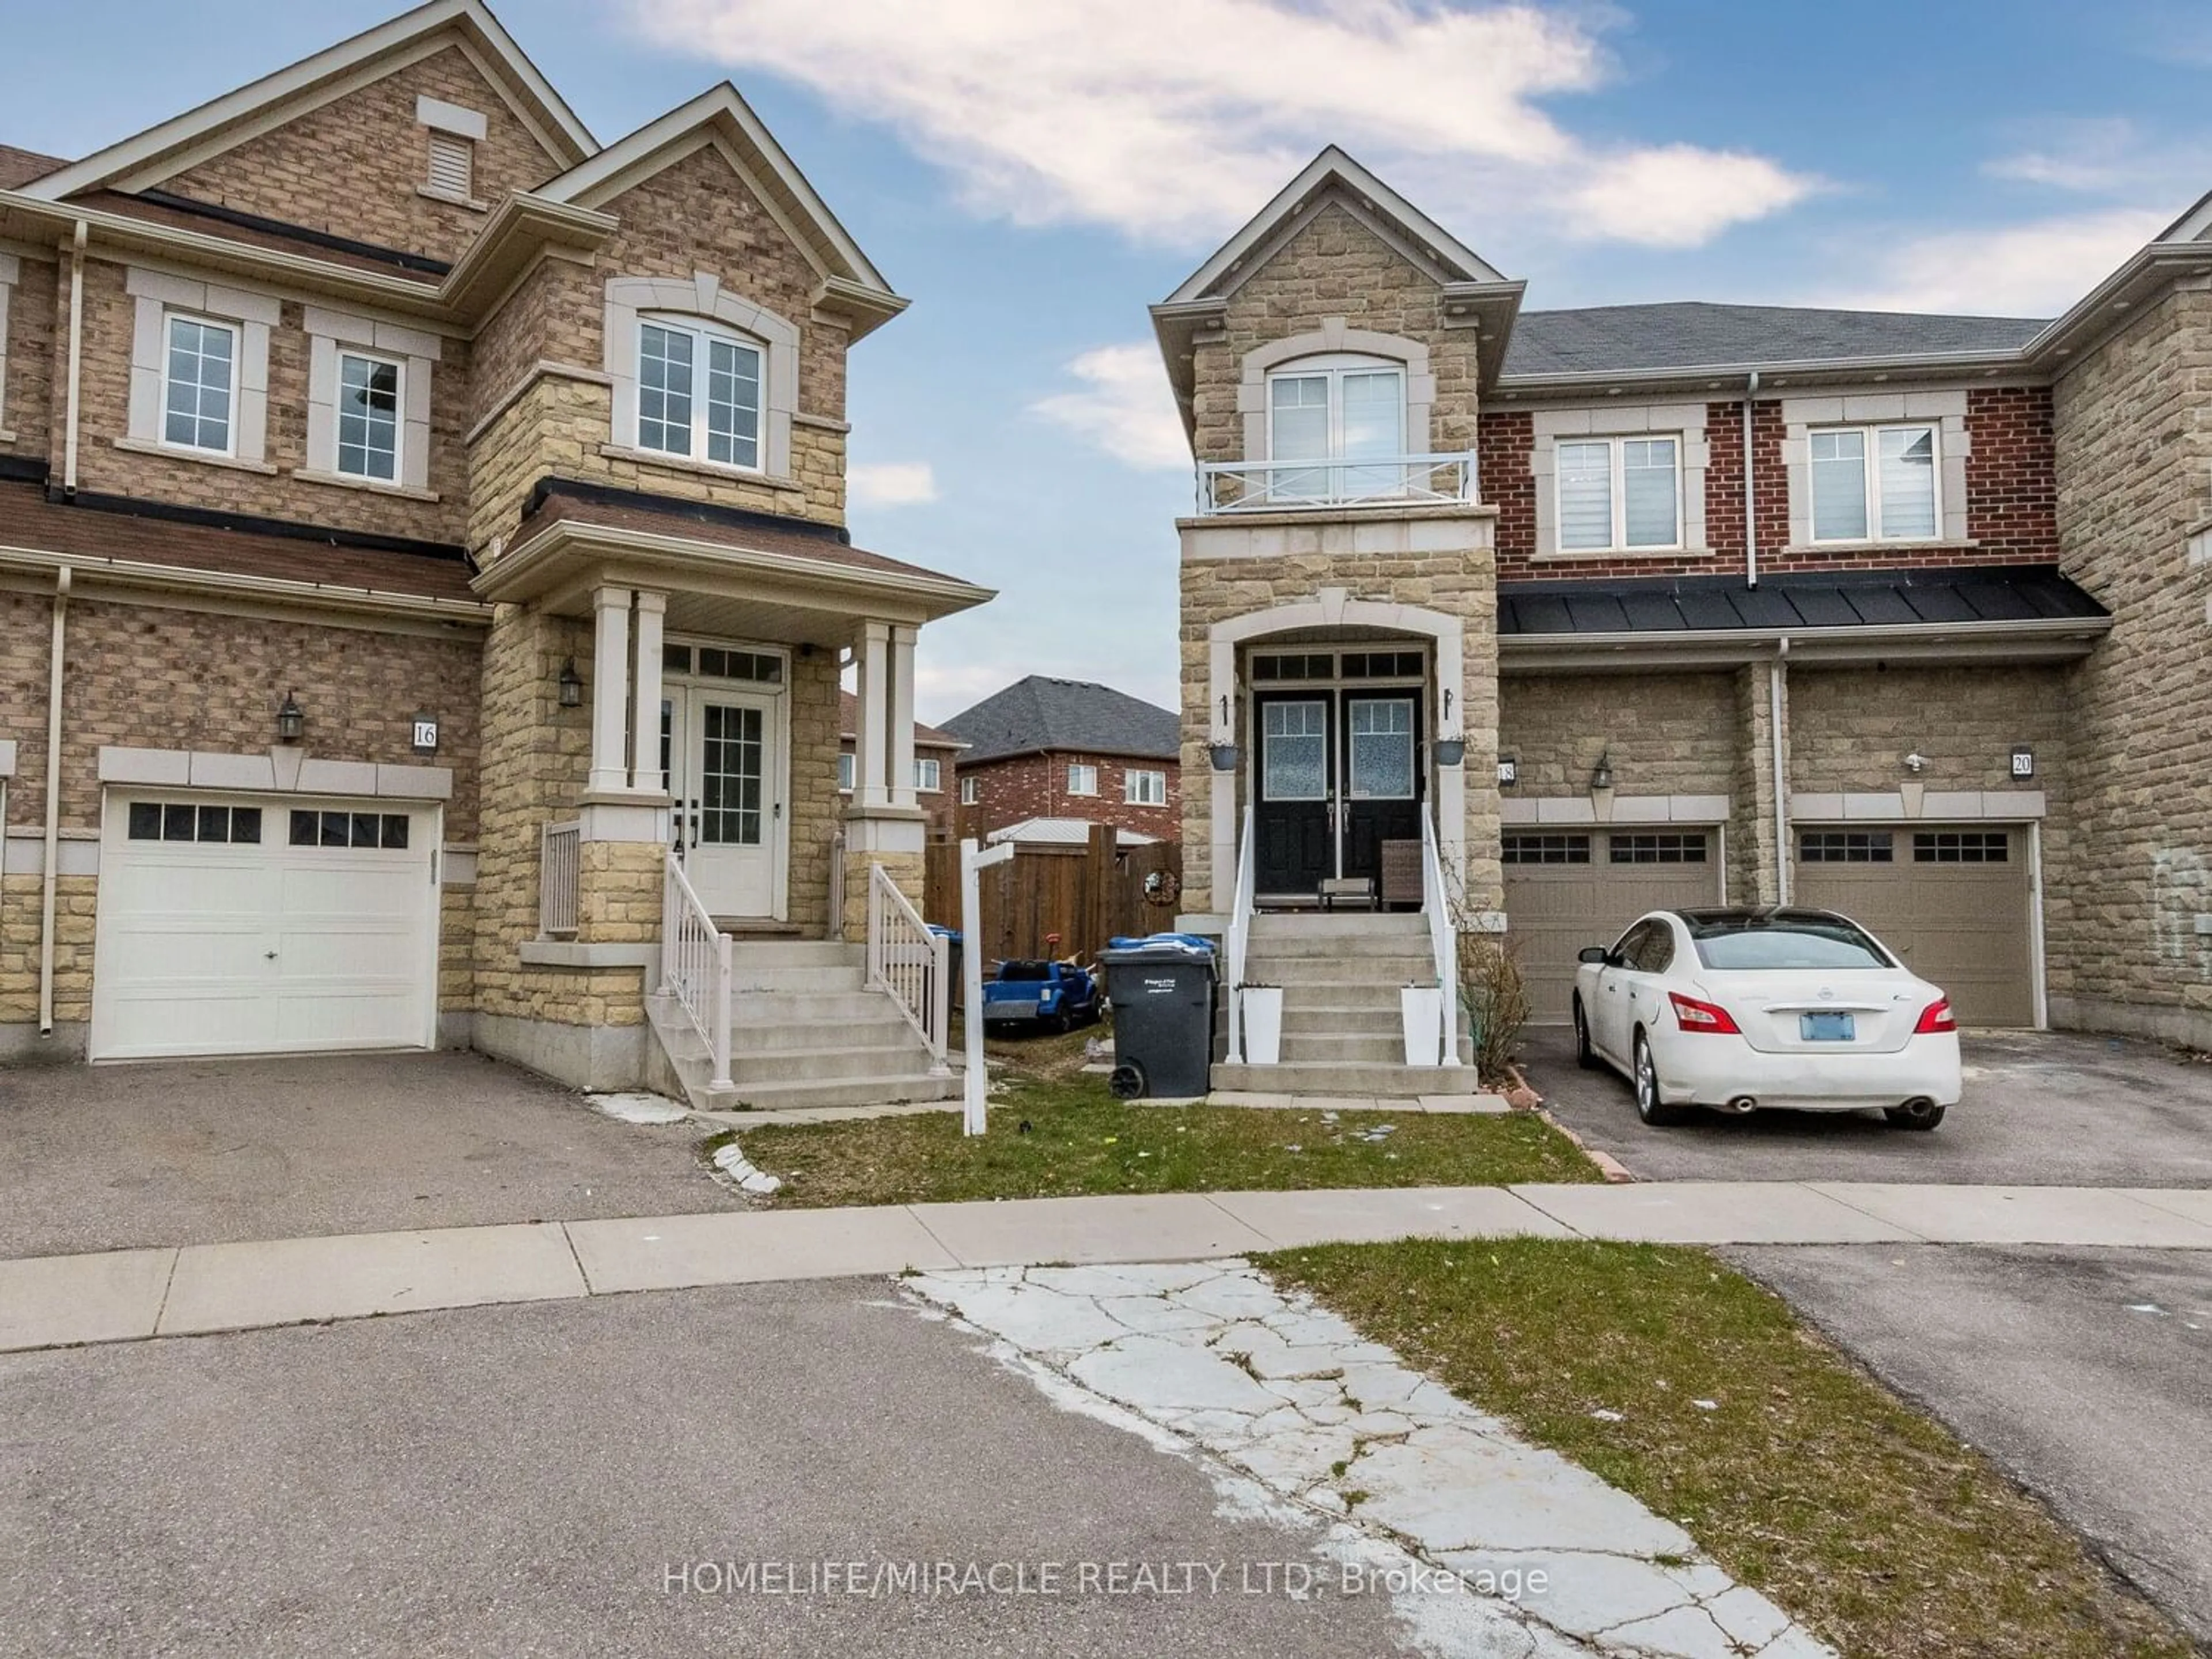 Frontside or backside of a home for 16 Banas Way, Brampton Ontario L7A 4K8